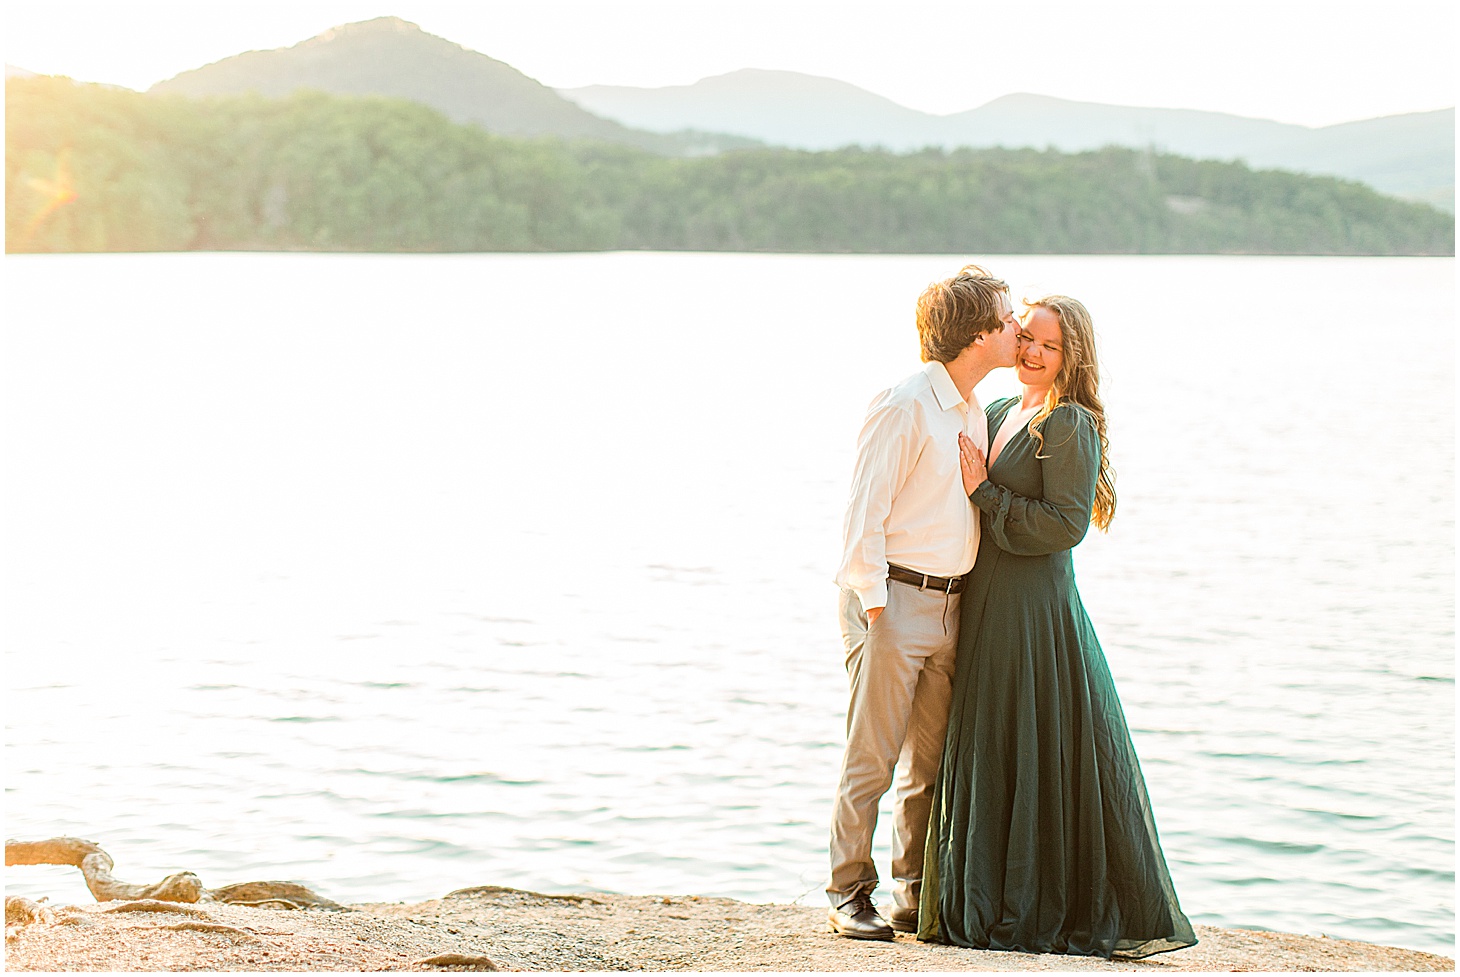 carvinscoveengagementsession_roanokeengagementsession_carvinscove_virginiawedding_virginiaweddingphotographer_vaweddingphotographer_photo_0037.jpg